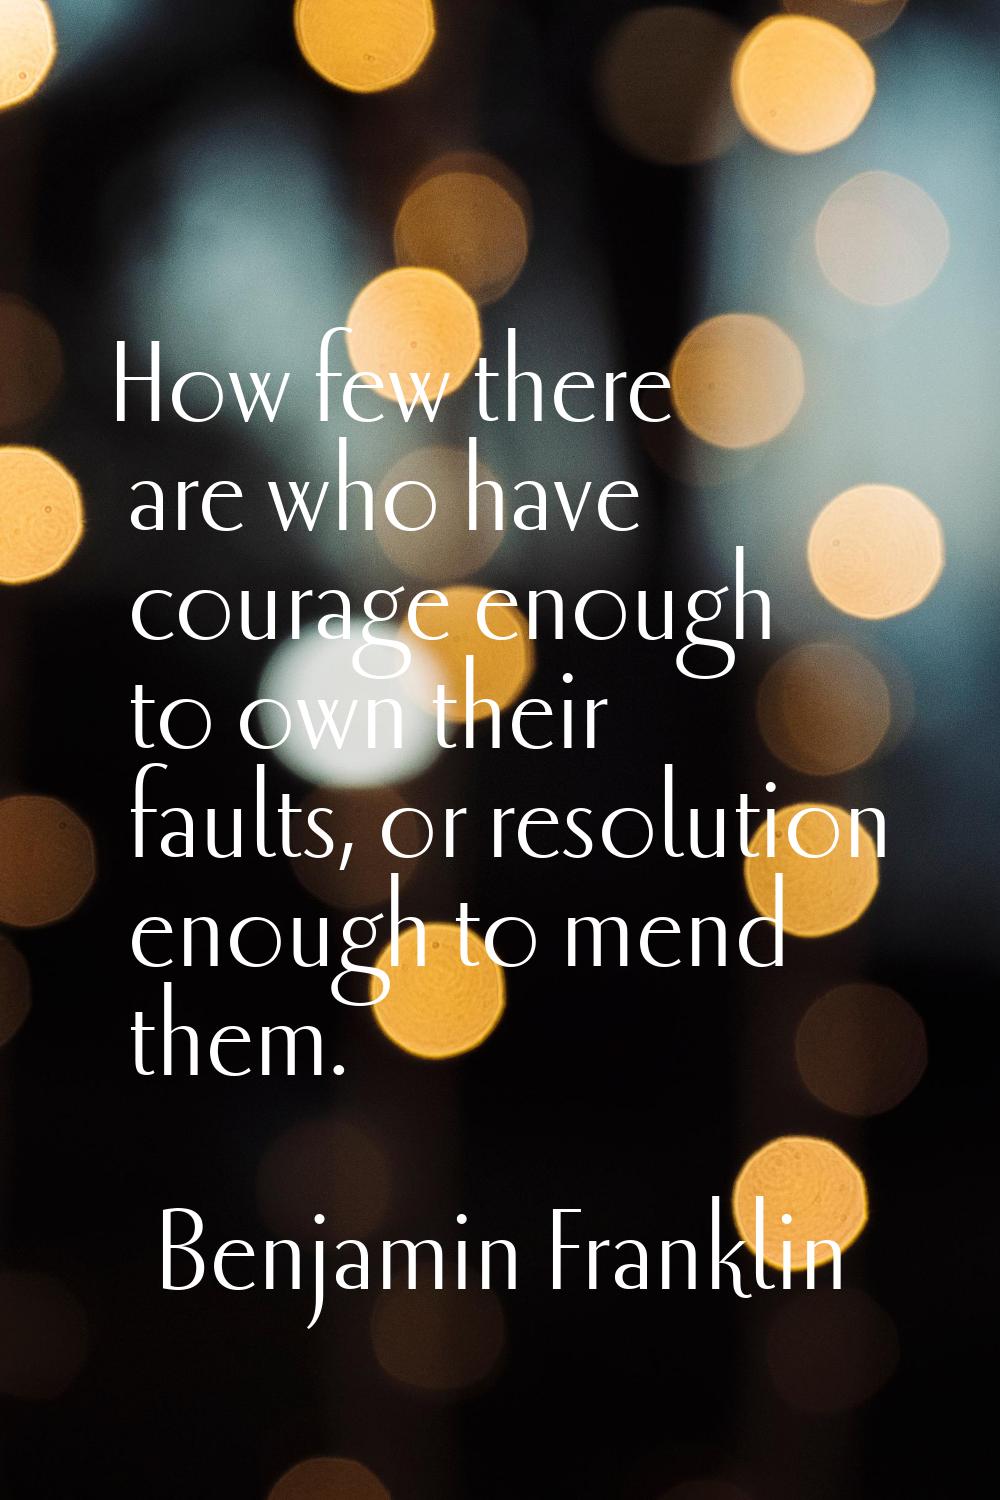 How few there are who have courage enough to own their faults, or resolution enough to mend them.